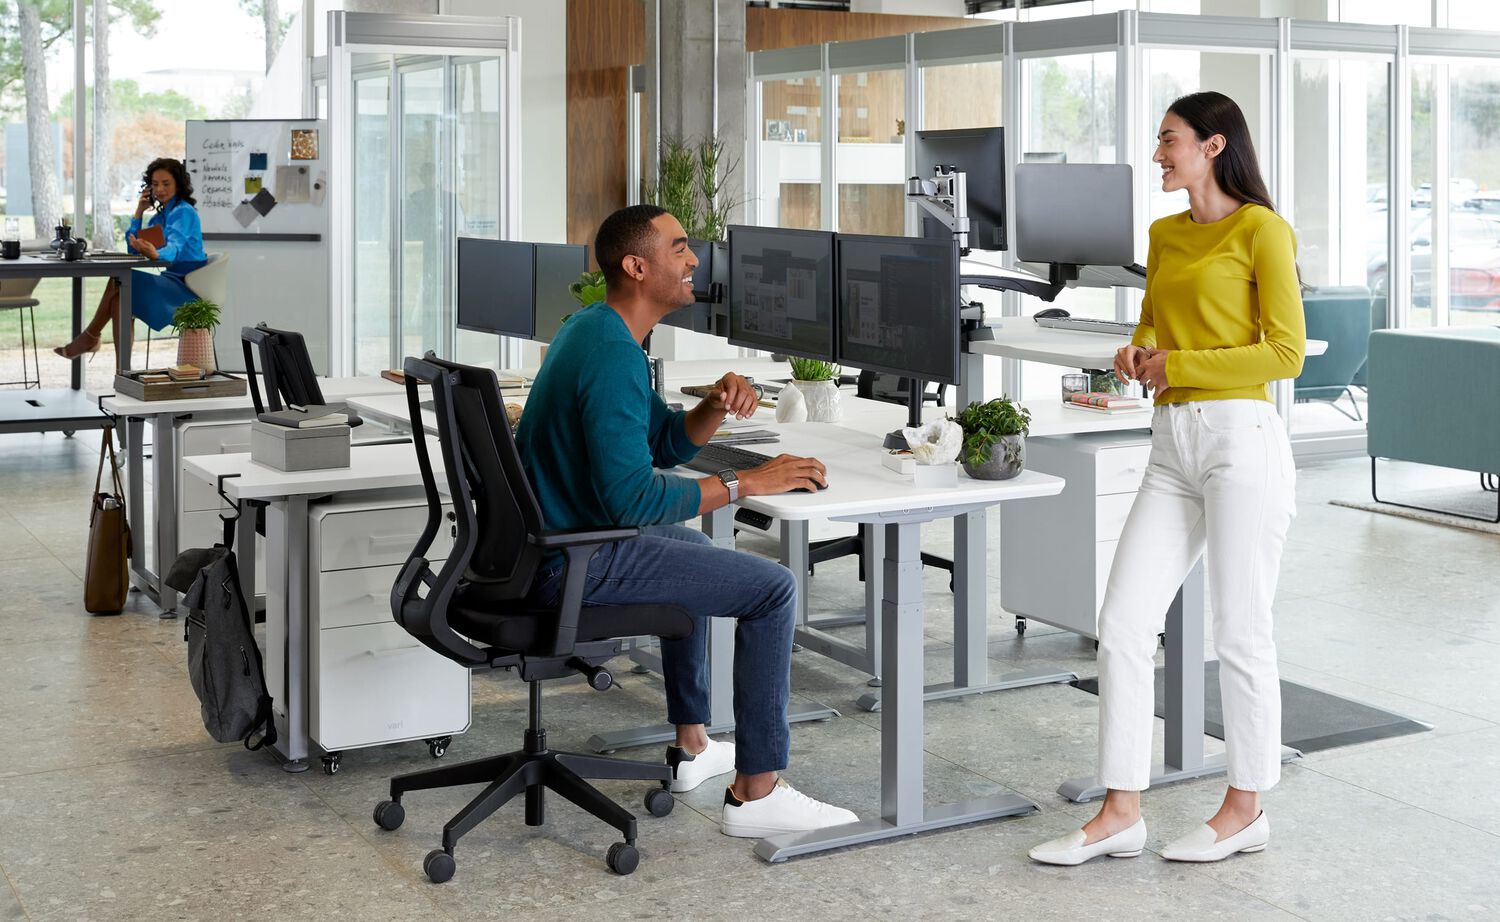 vari office furniture being used by a team in a commercial office workplace